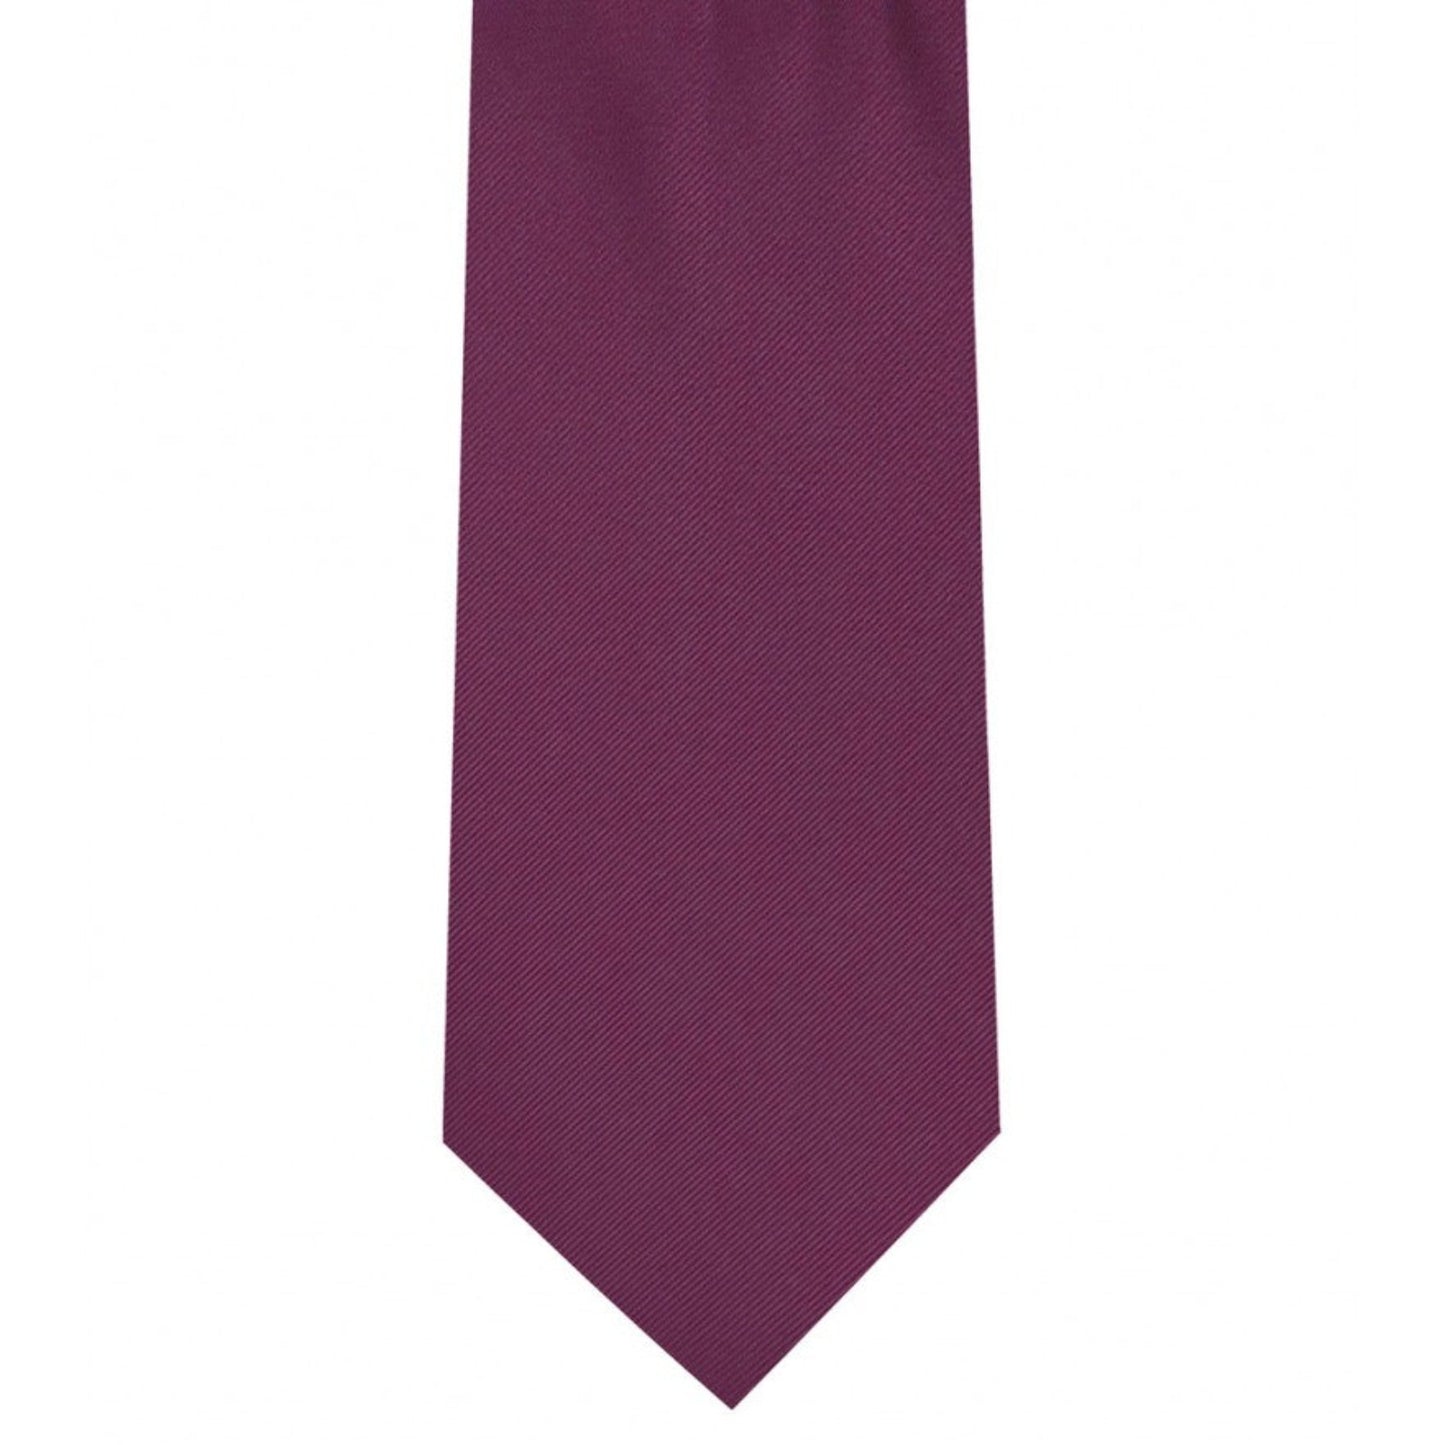 Classic Magenta Tie Ultra Skinny tie width 2.25 inches With Matching Pocket Square | KCT Menswear